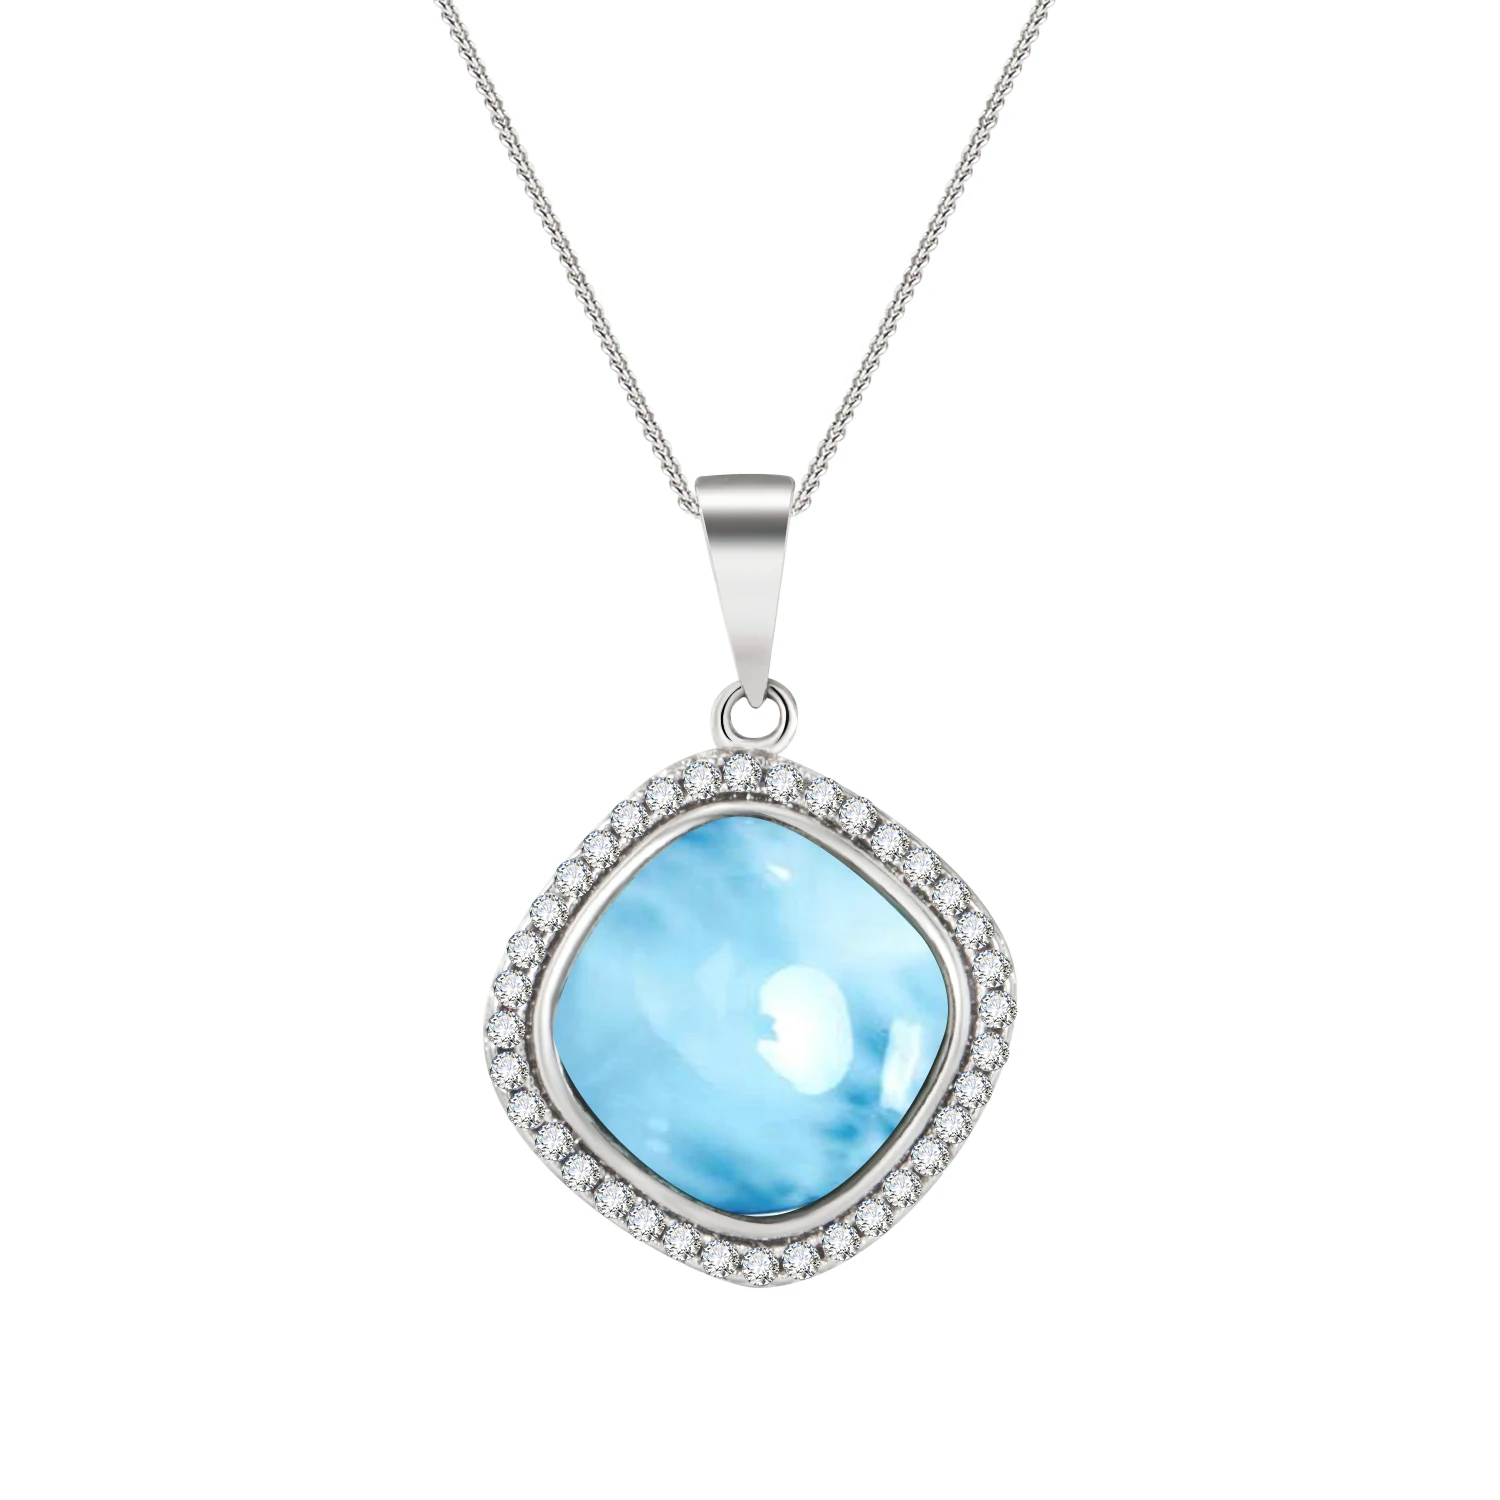 

Most Popular New Collection S925 Sterling Silver Jewelry Beautiful Natural Cushion Blue Larimar Charm Pendant Necklace For Women